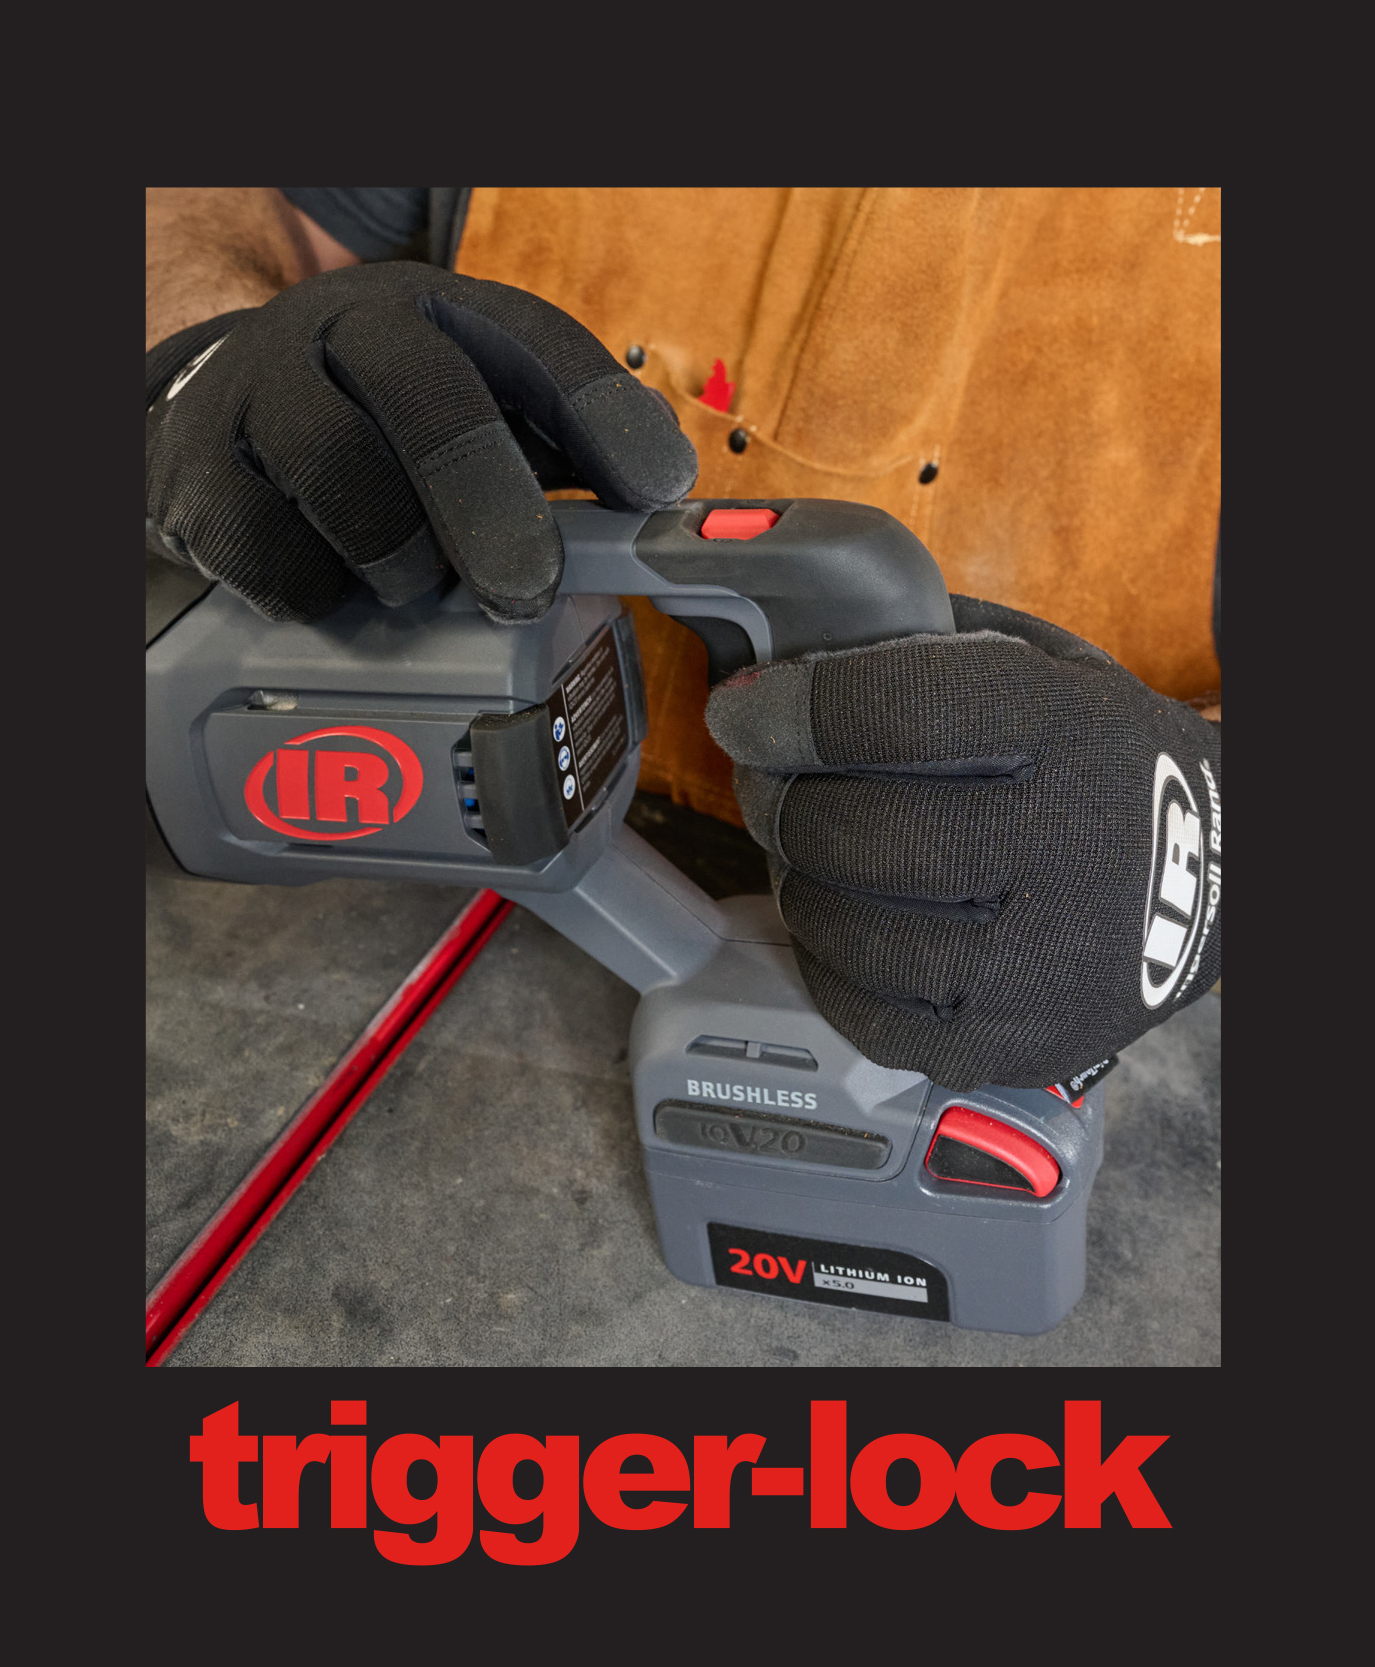 cordless reciprocating saw has a trigger lock for anti-restart protection.